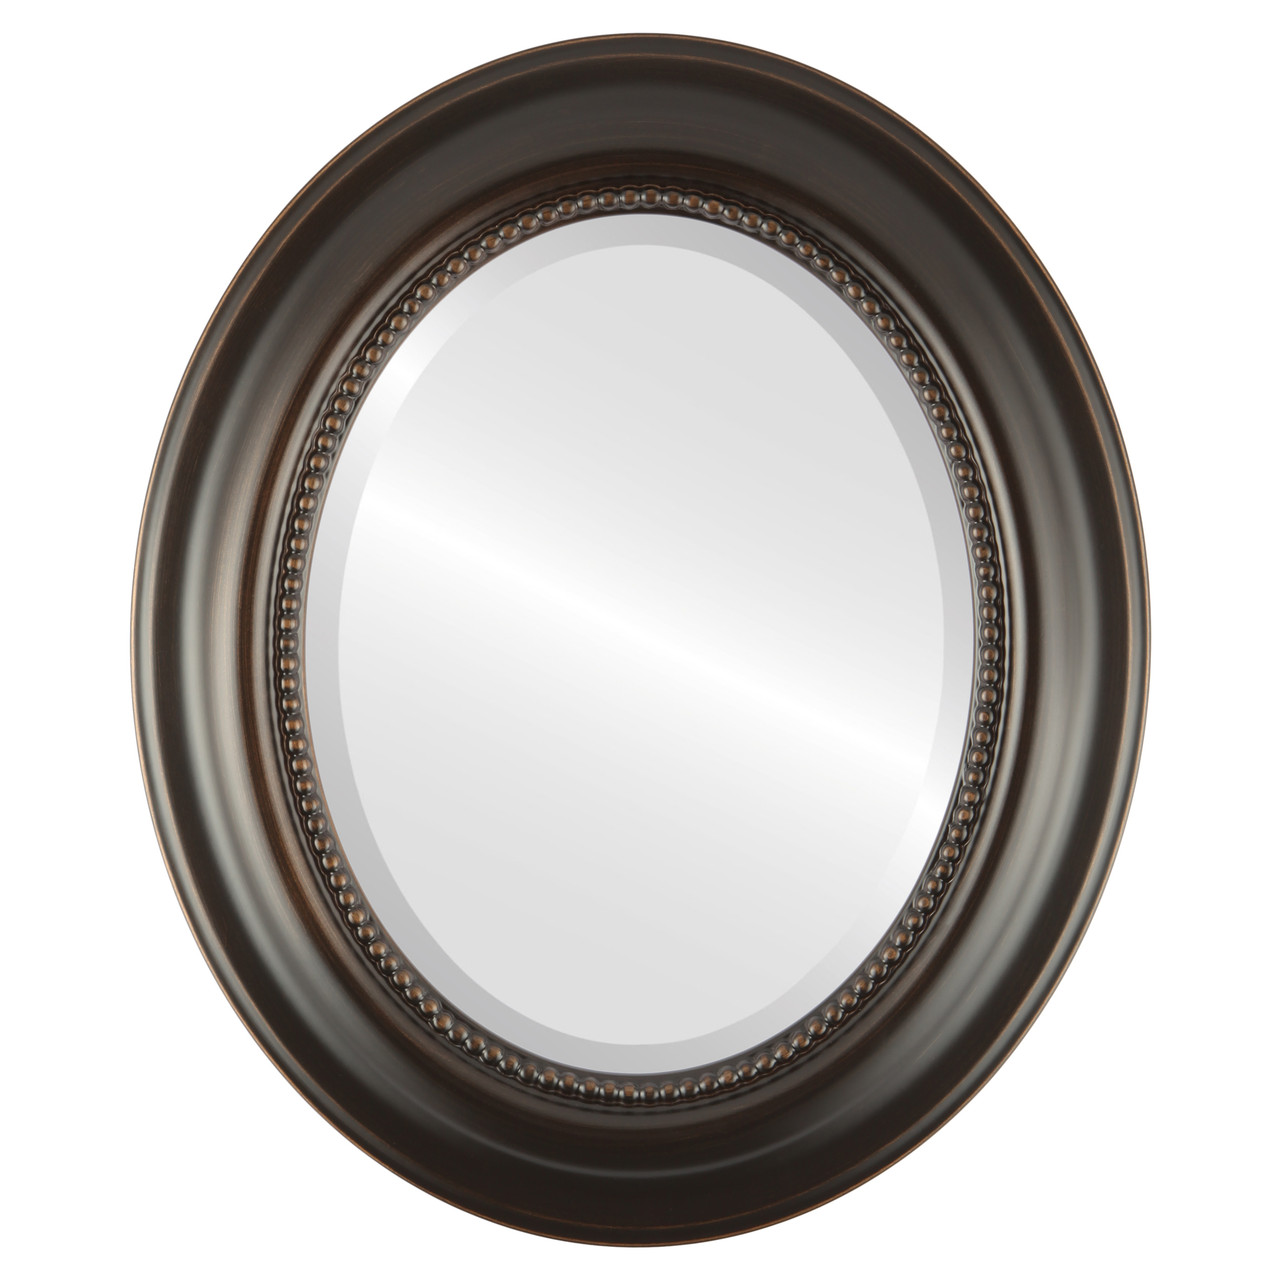 Decorative Black Oval Mirrors from $146 Free Shipping